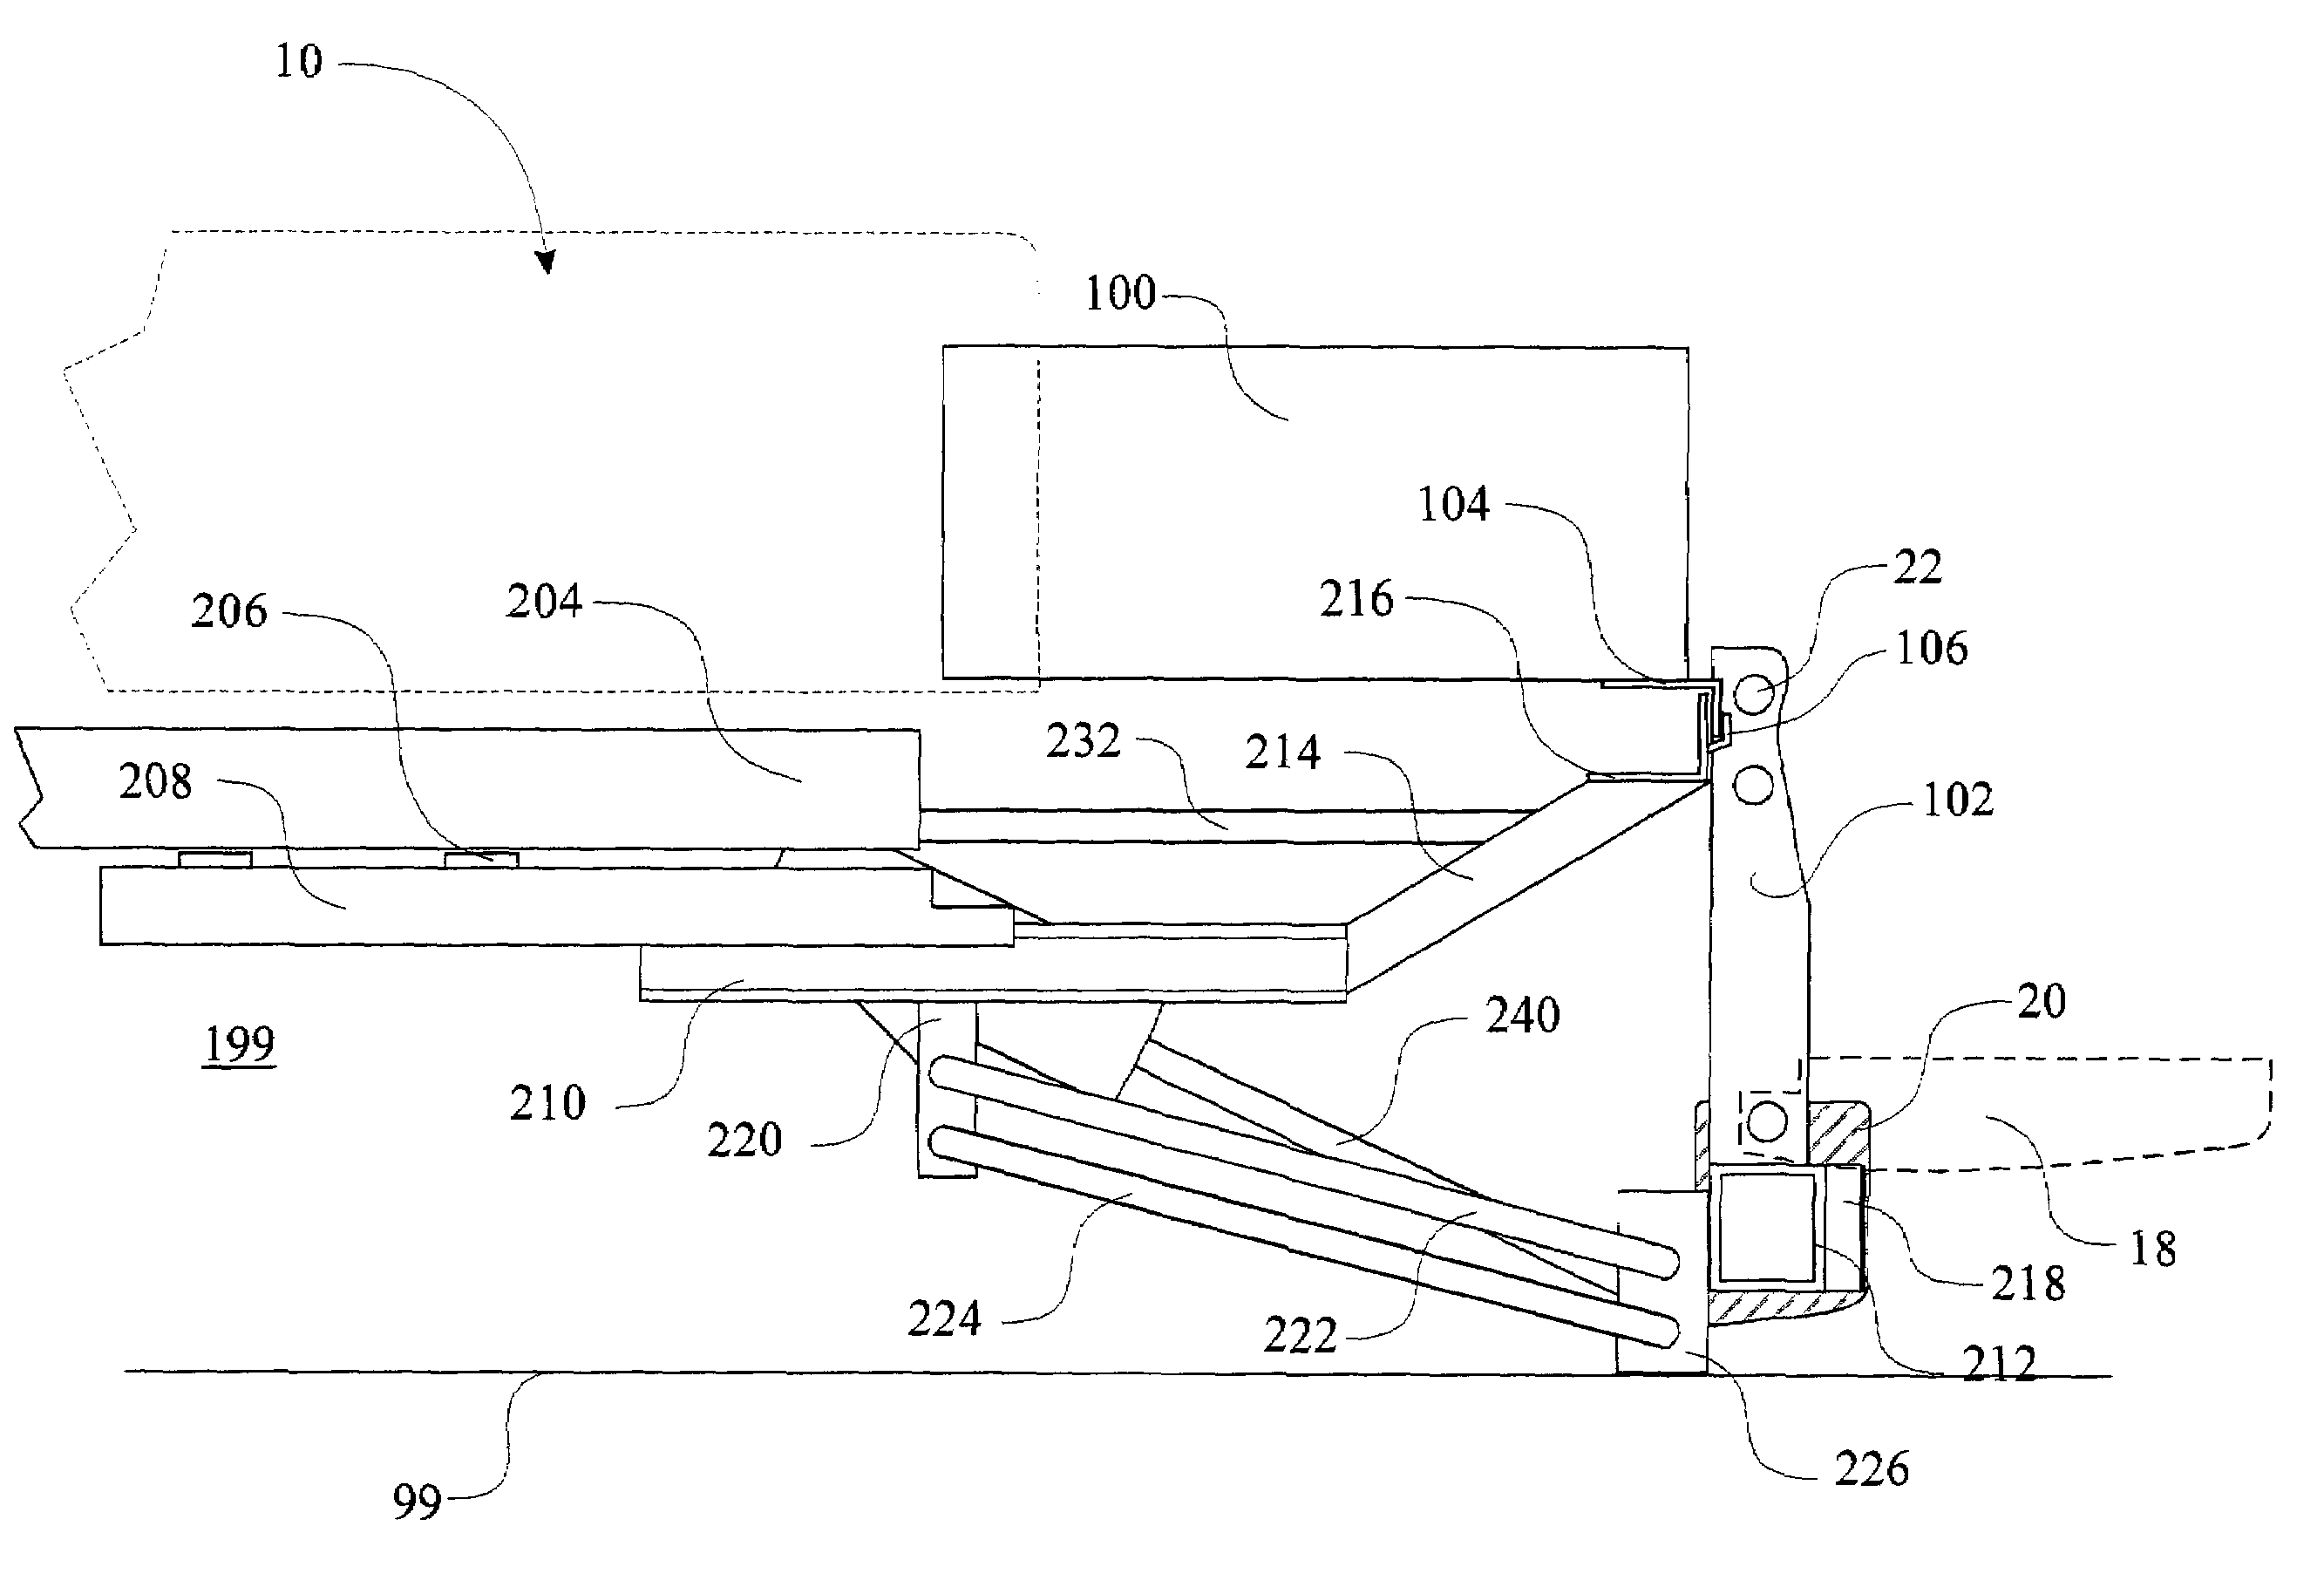 Bed extension and stepgate pickup truck apparatus